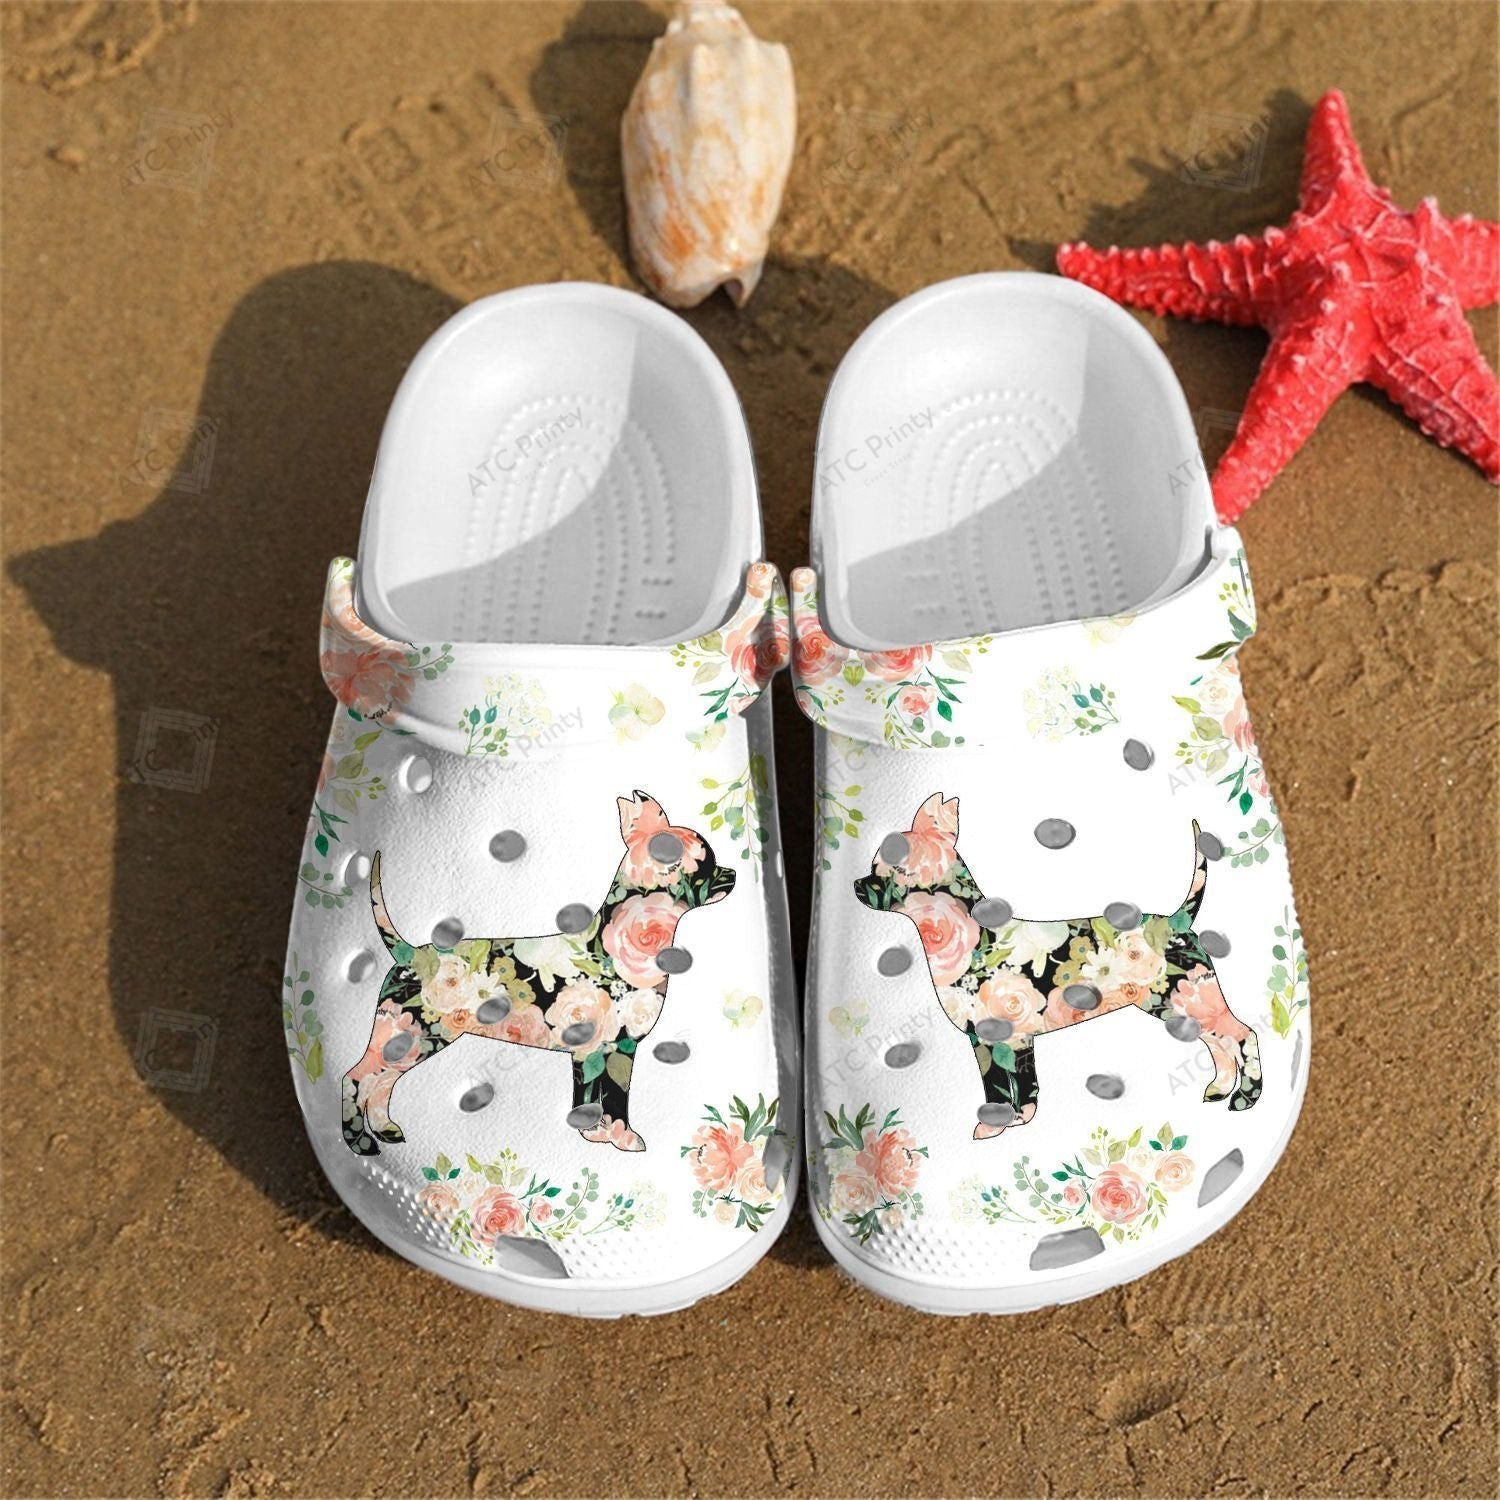 The Funny Rose Dog Crocs Shoes Clogs Gifts For Birthday